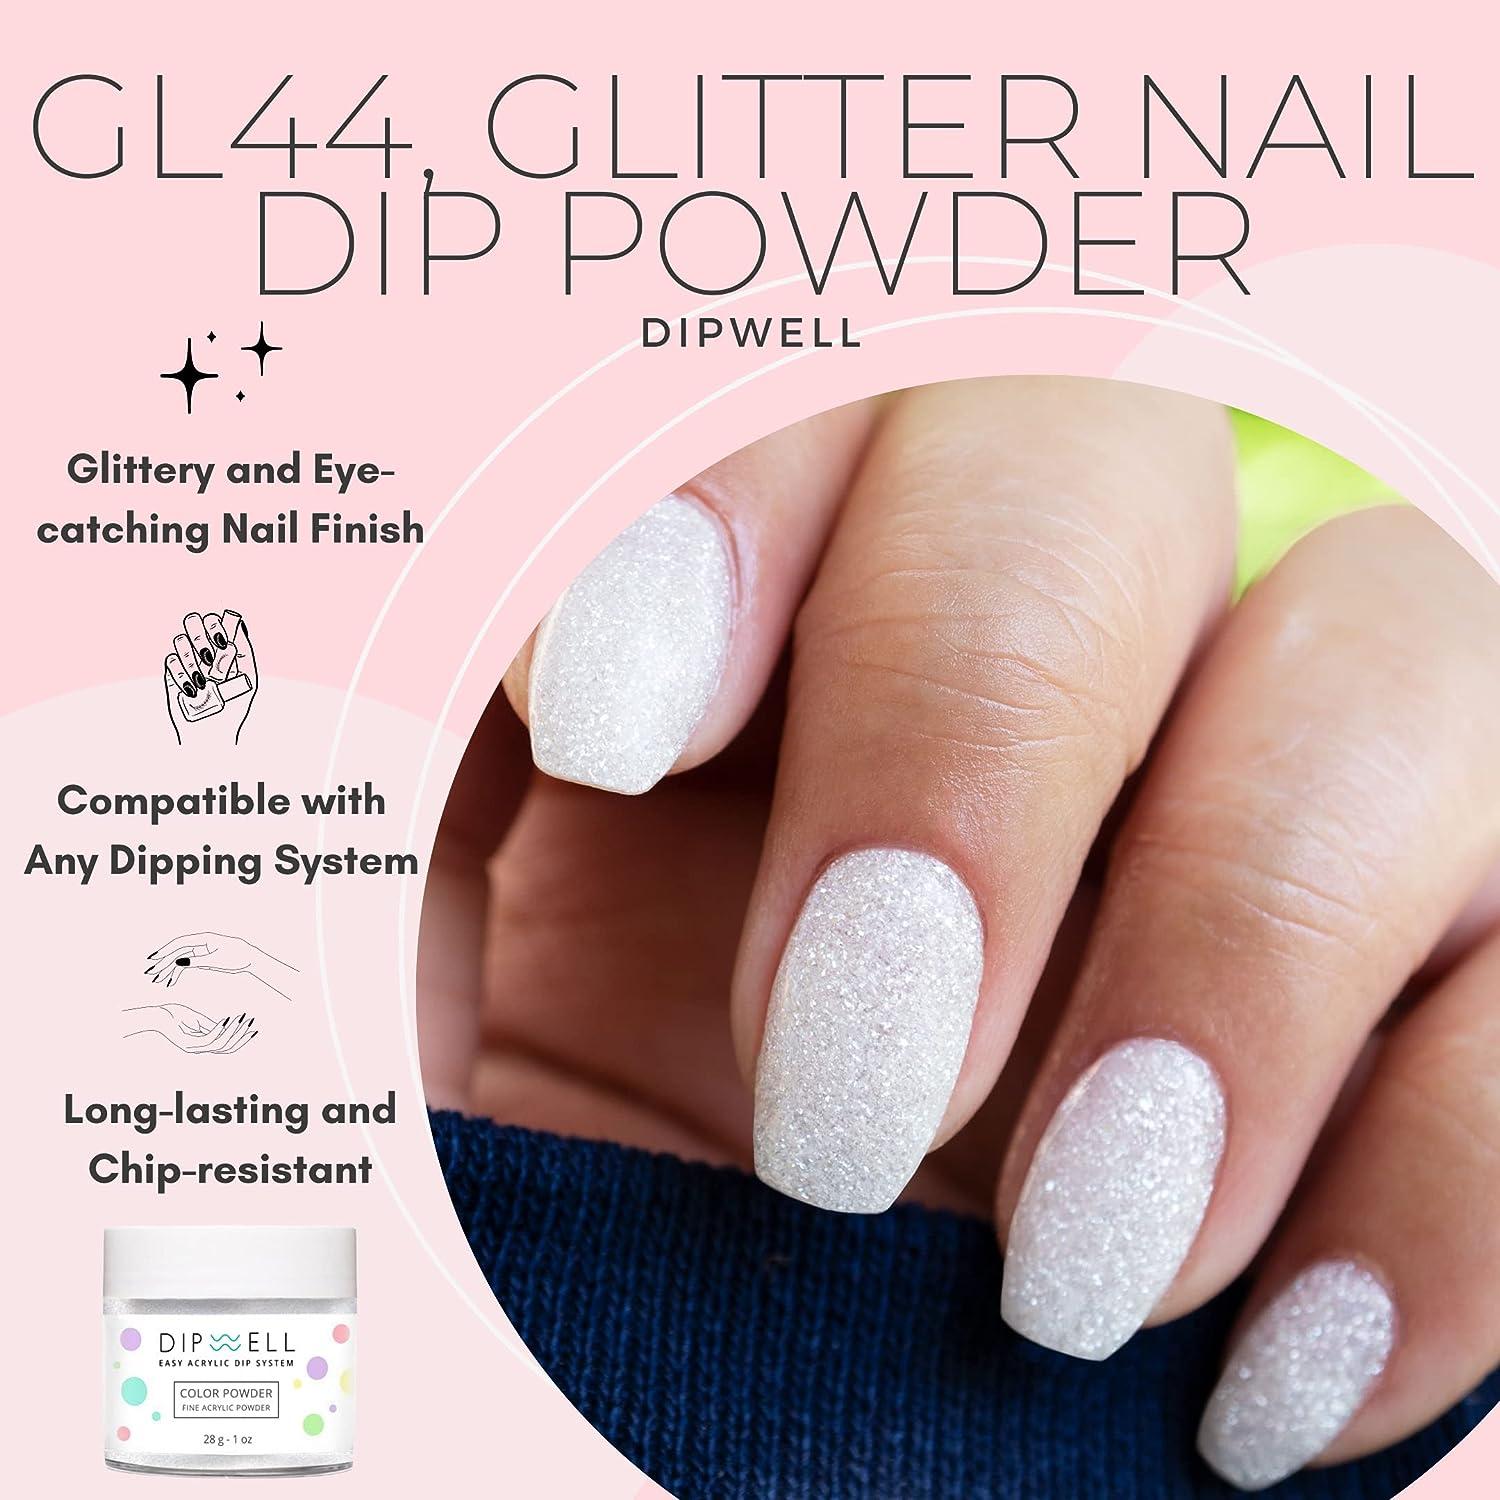 How To Add Glitter To Dip Powder Nails